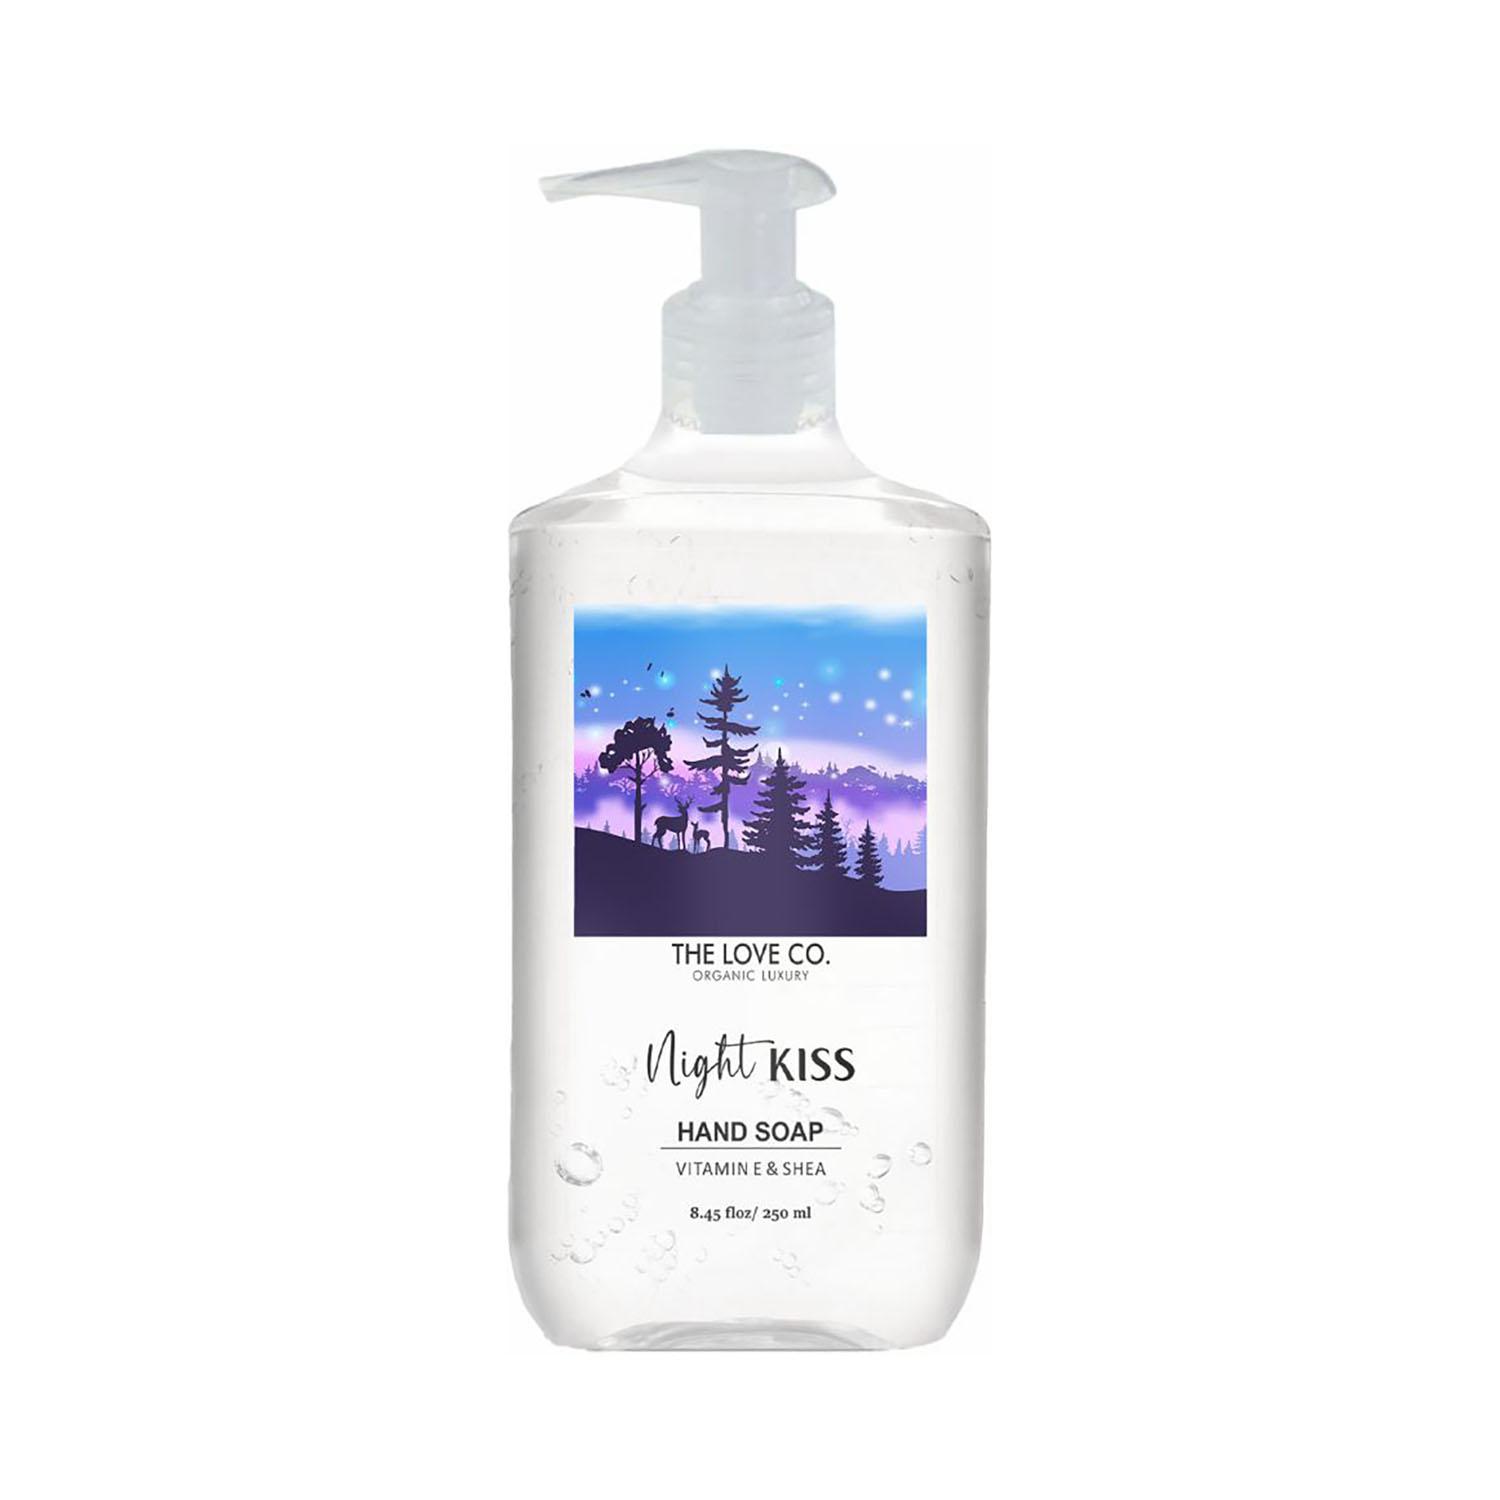 THE LOVE CO. | THE LOVE CO. Night Kiss Hand Soap For Moisturized Hands (250ml)